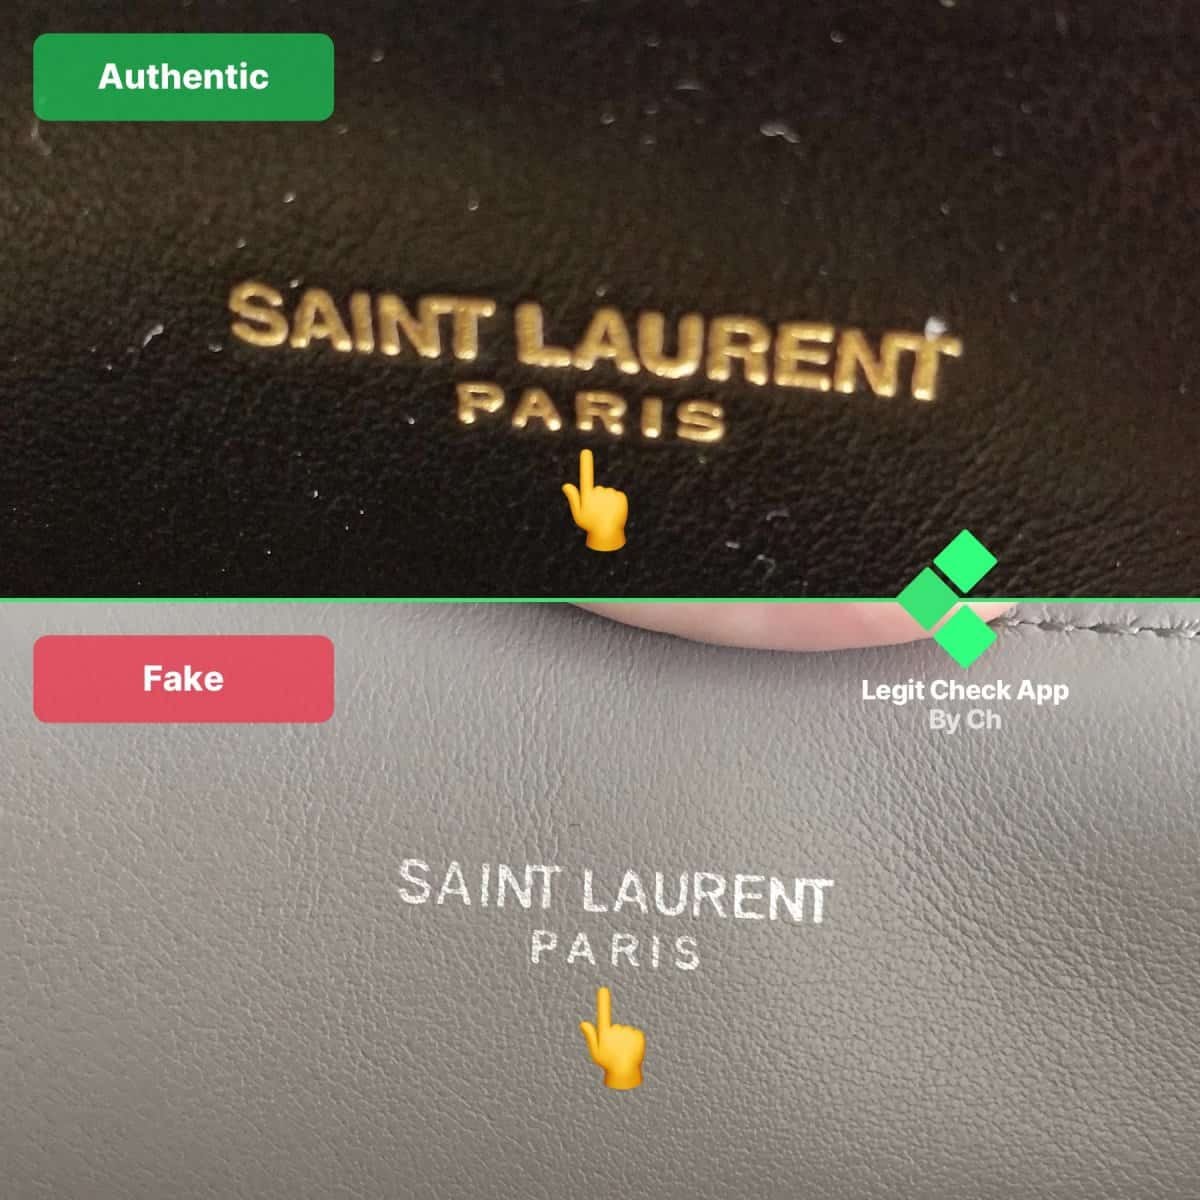 Yves Saint Laurent LouLou Monogram Quilted Chevron — Real Vs Fake